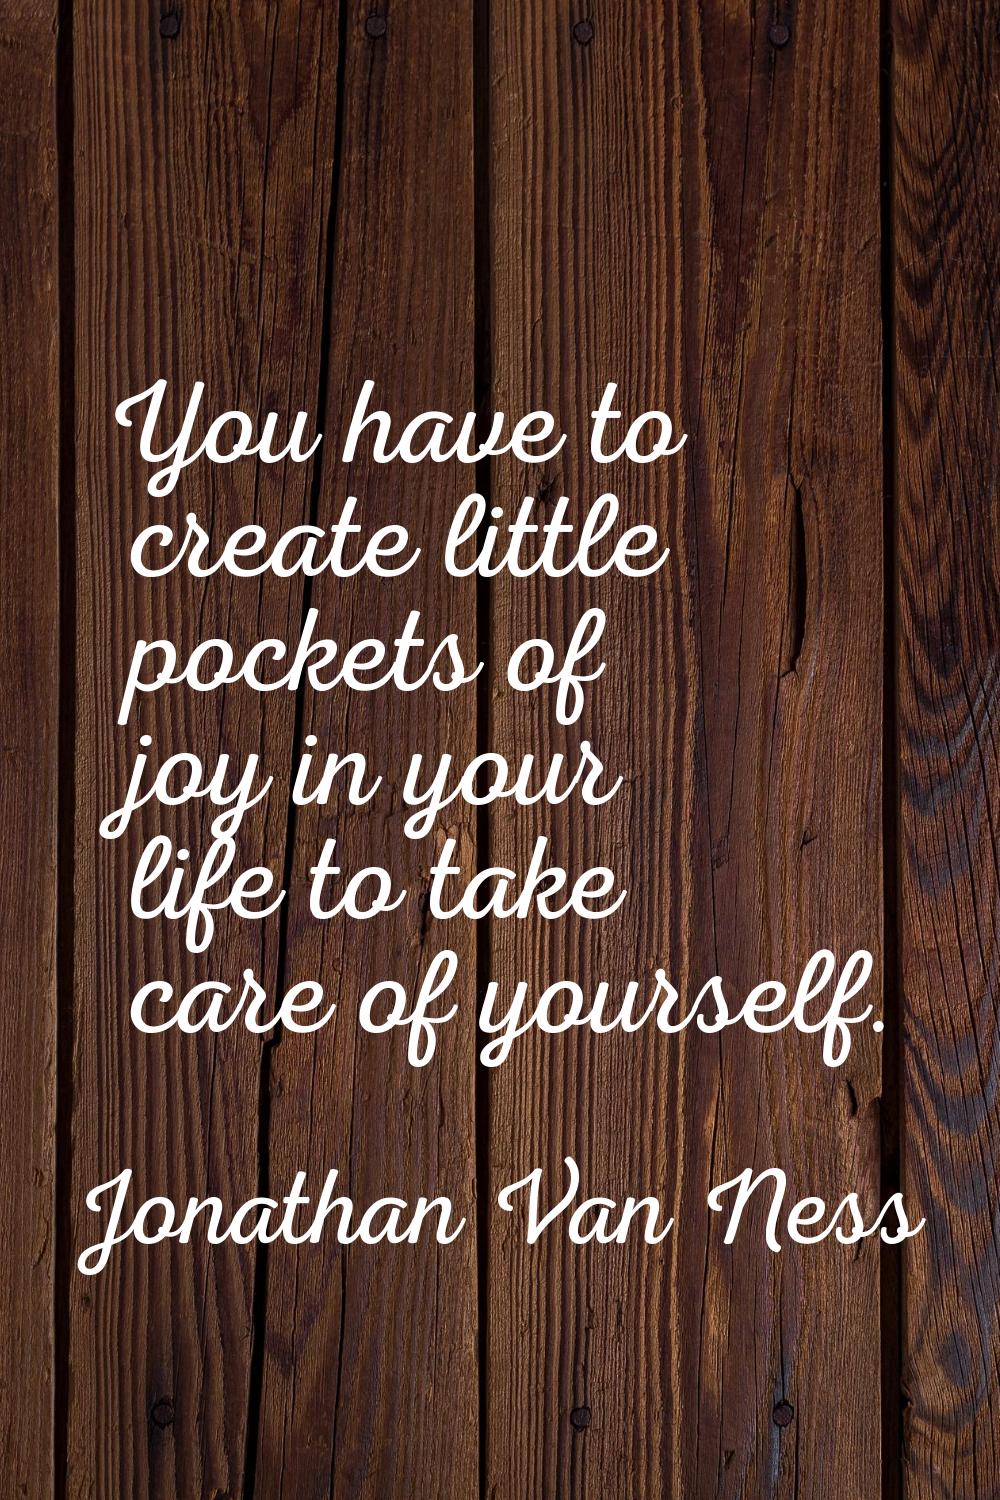 You have to create little pockets of joy in your life to take care of yourself.